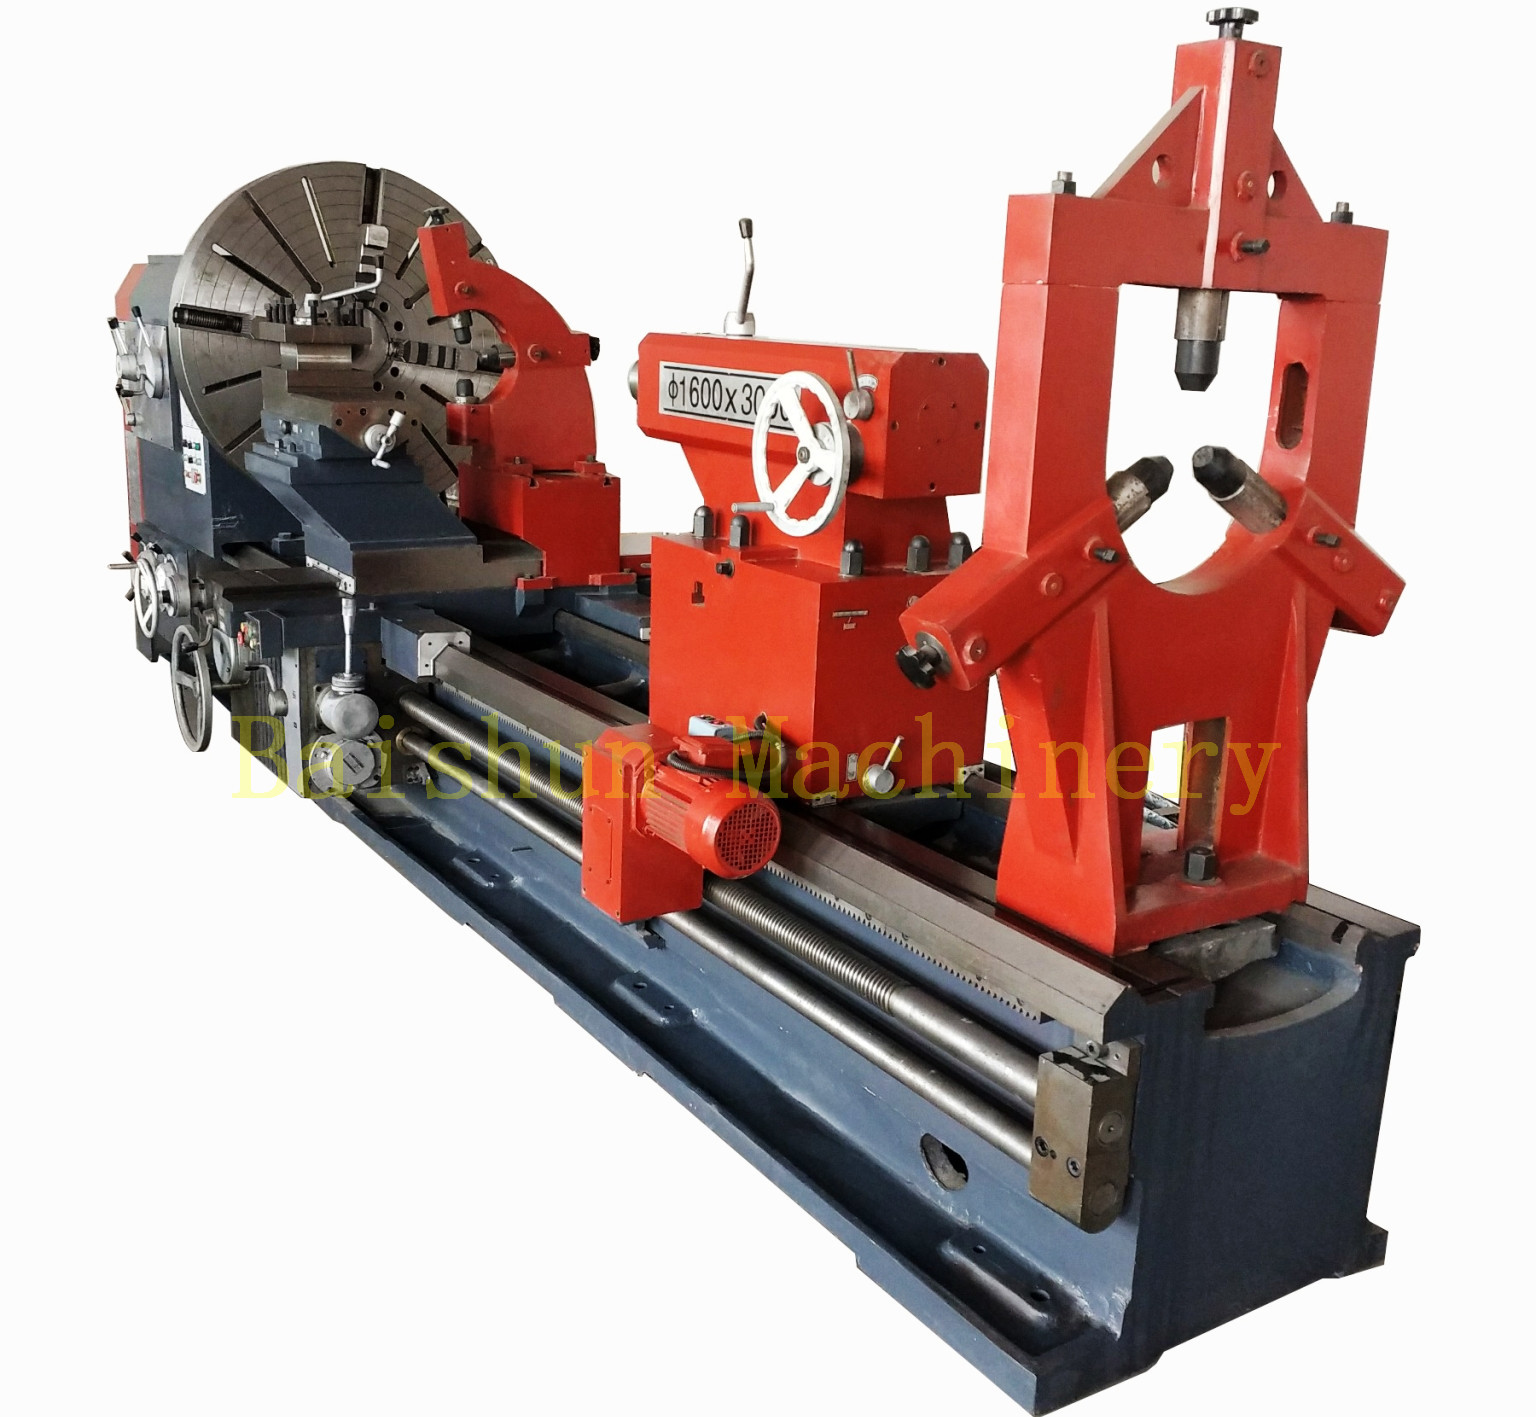  Metal Large Horizontal Lathe Machine Integrally Cast Lathe Bed Structure Manufactures